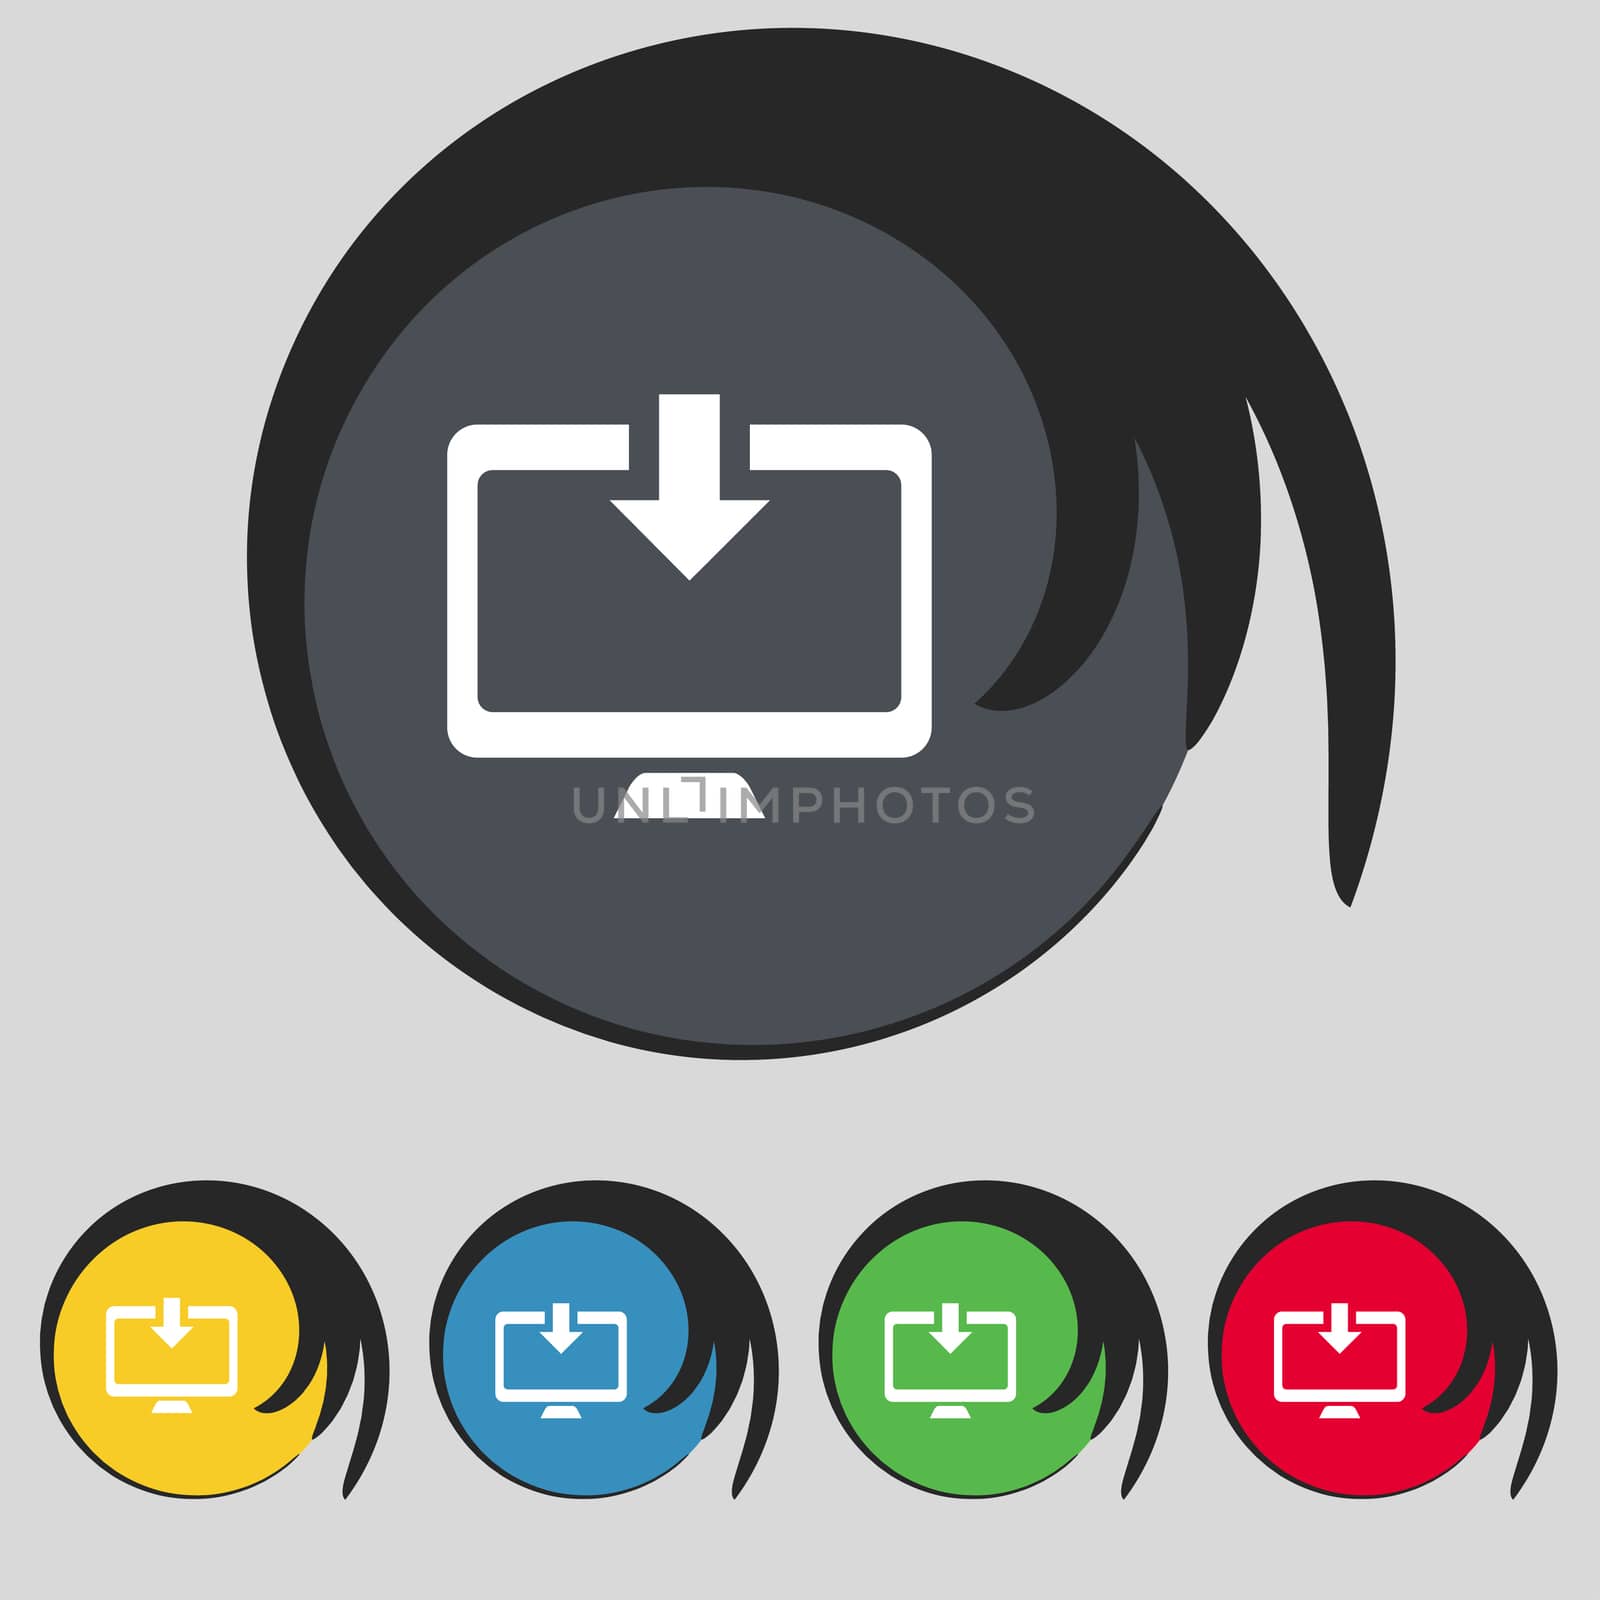 Download, Load, Backup icon sign. Symbol on five colored buttons. illustration